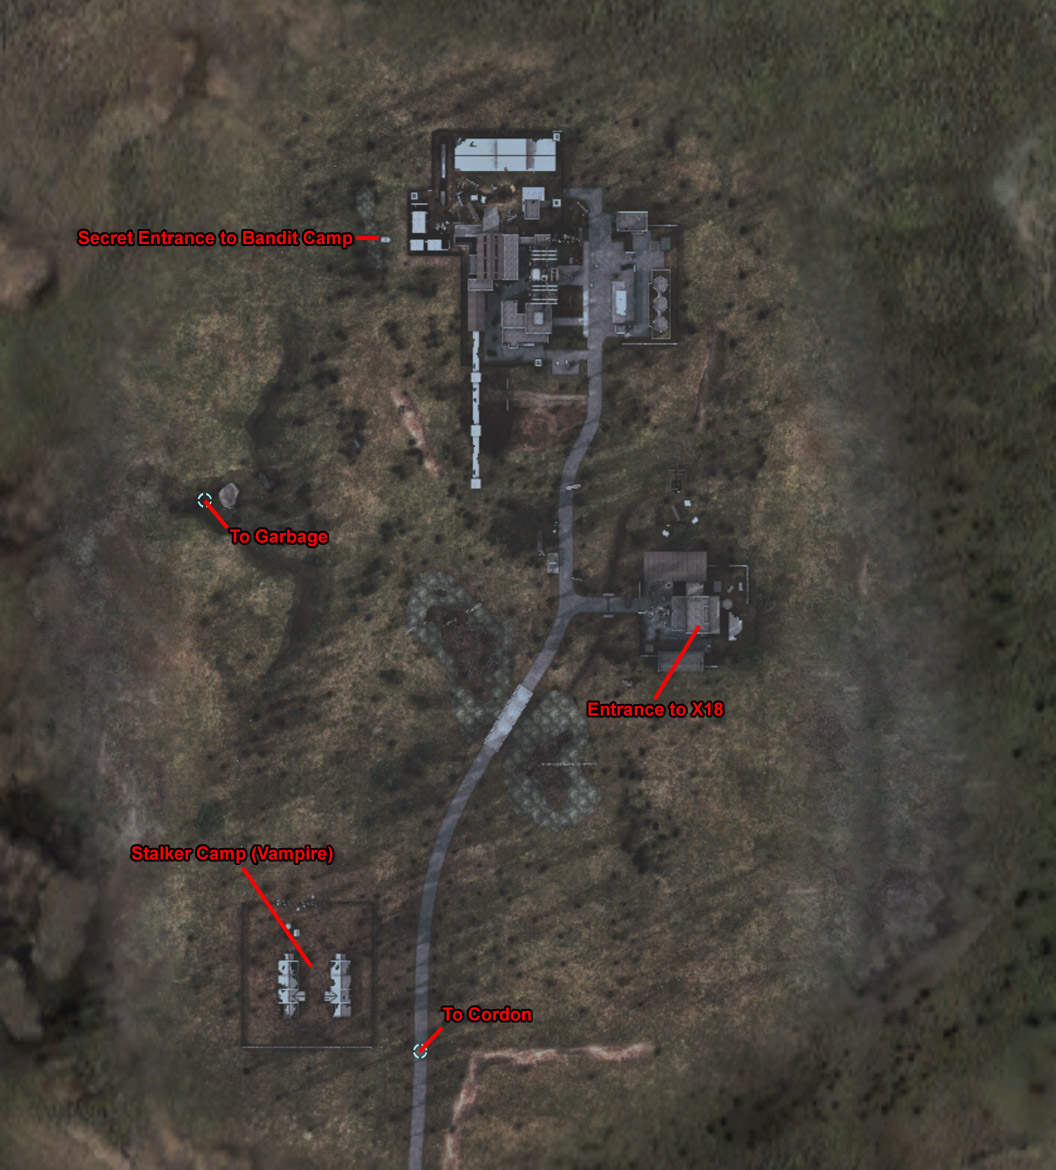 Map of Dark Valley (Click image or link to go back)